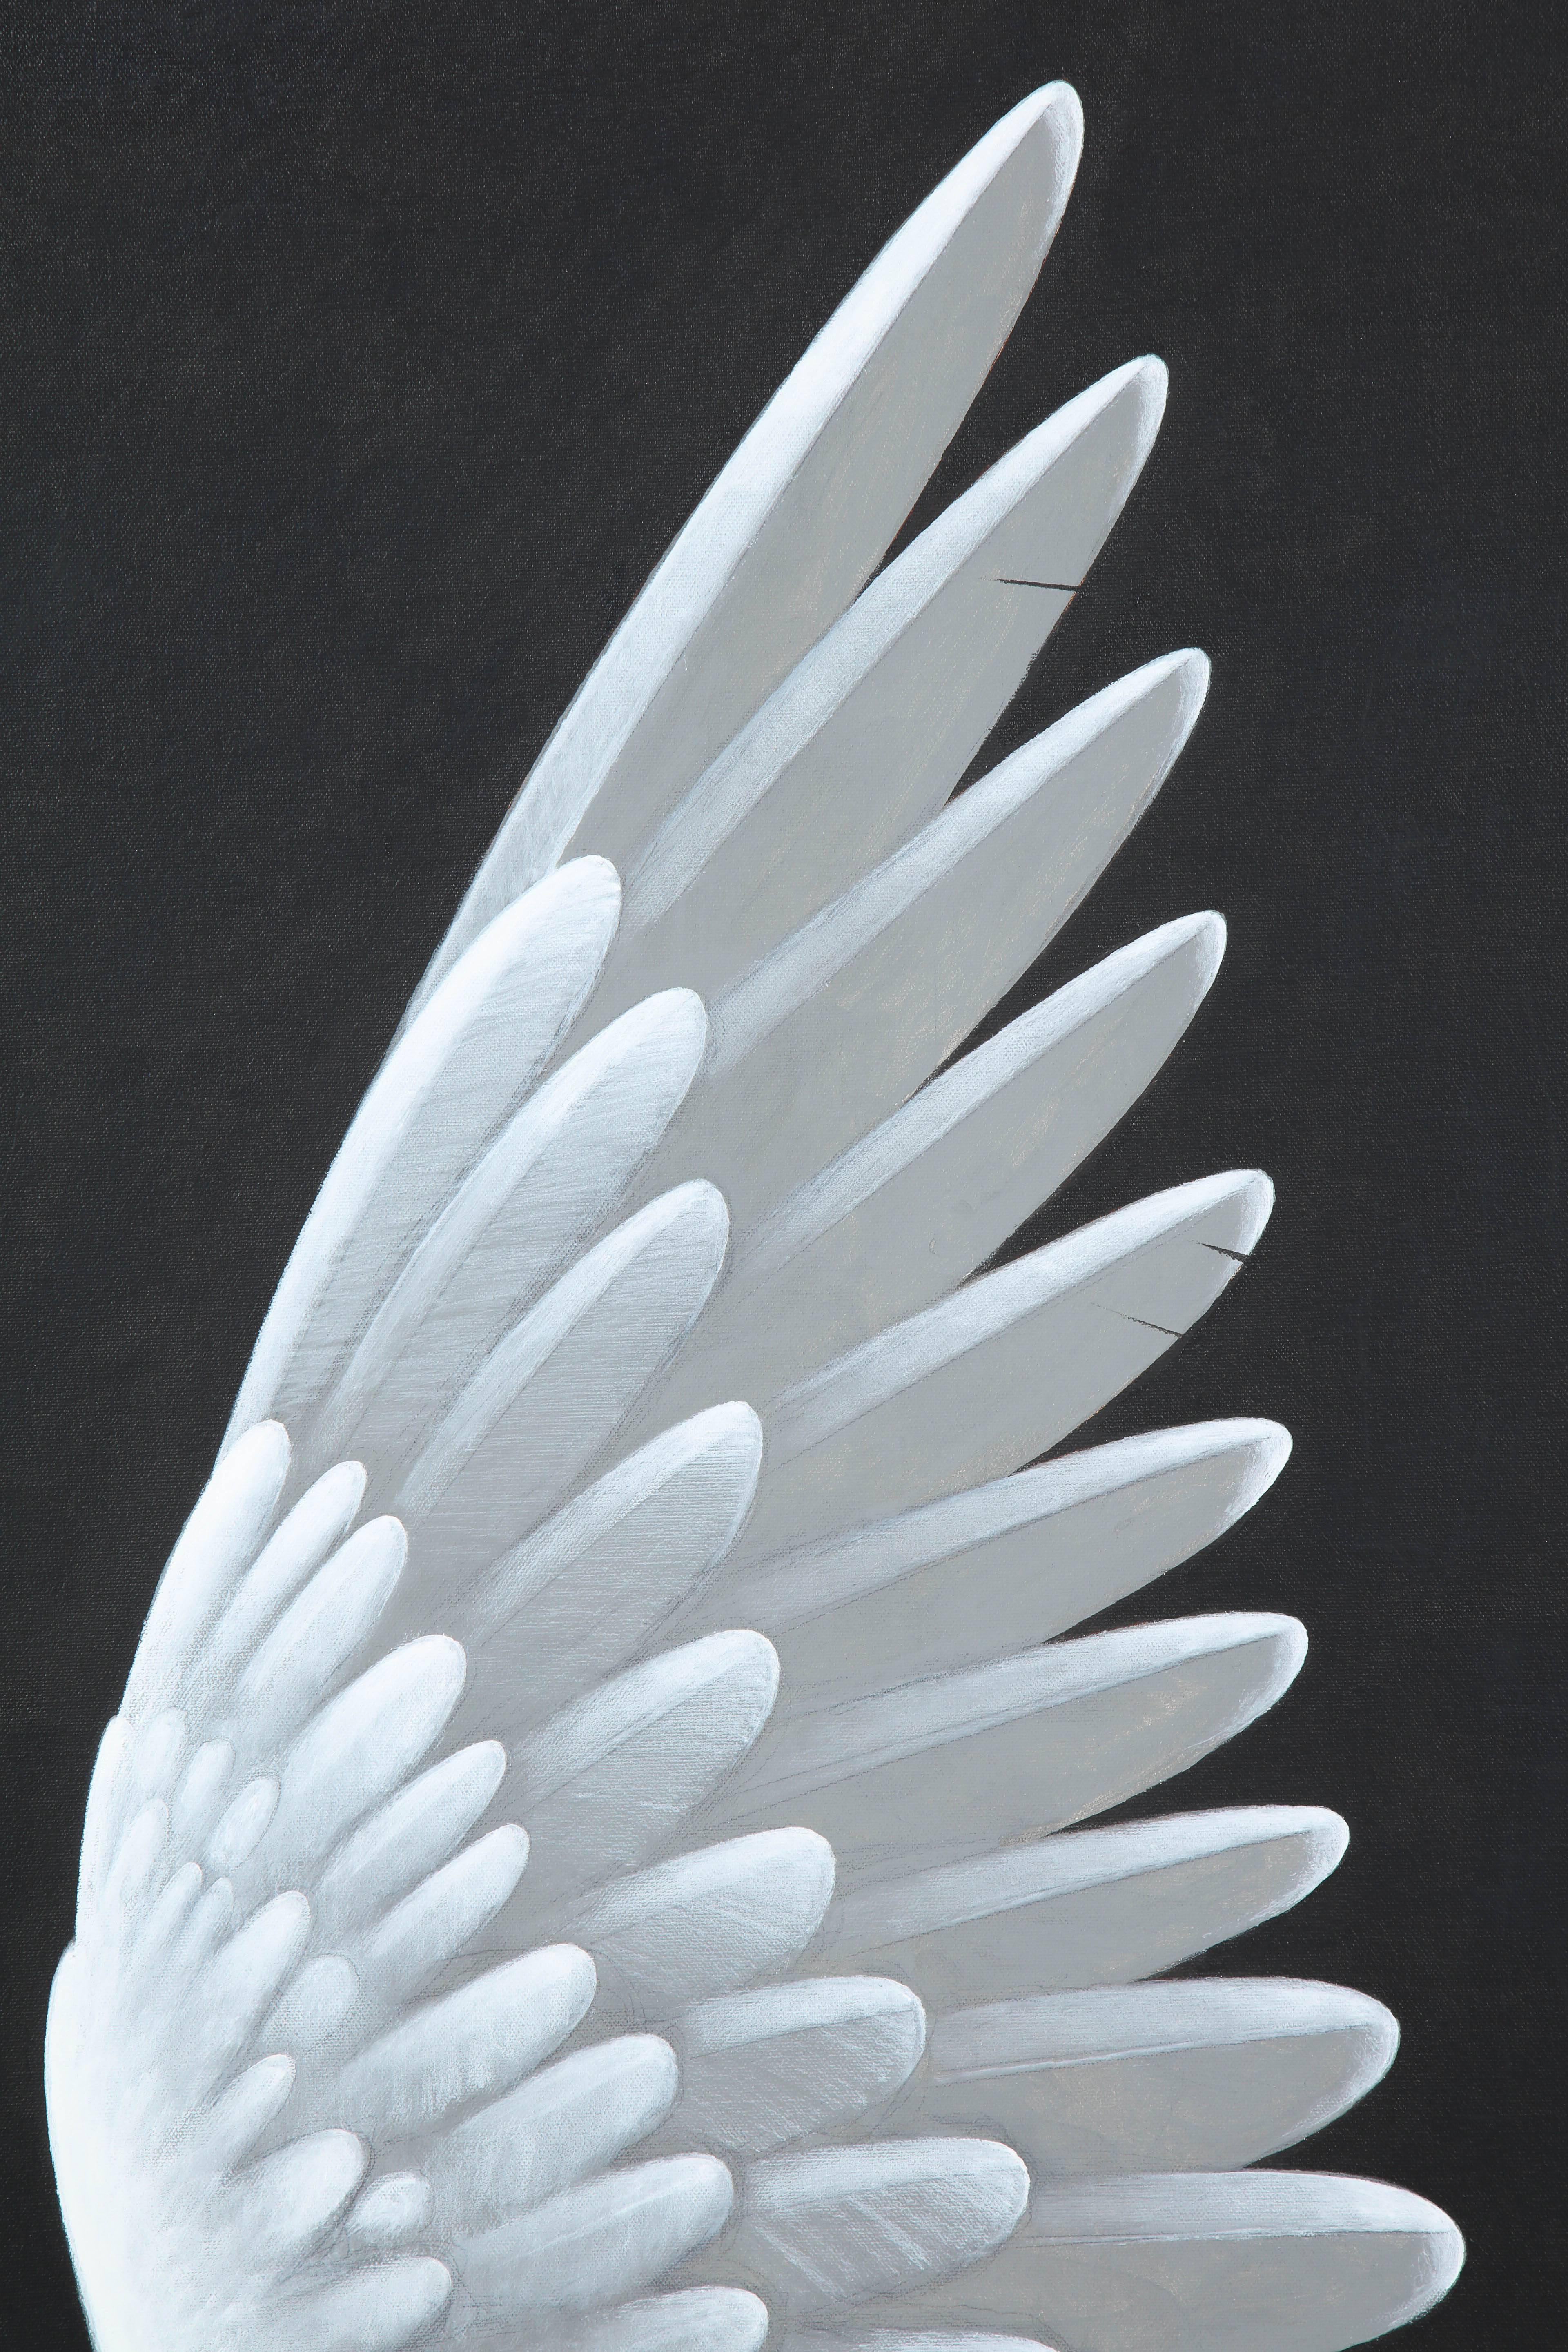 Wing. An original painting by Lynn Curlee,
author/illustrator of award winning children's books.

The painting is acrylic on stretched canvas. The canvas is pulled around the edges of the stretcher bars and the edges are fully painted, so that